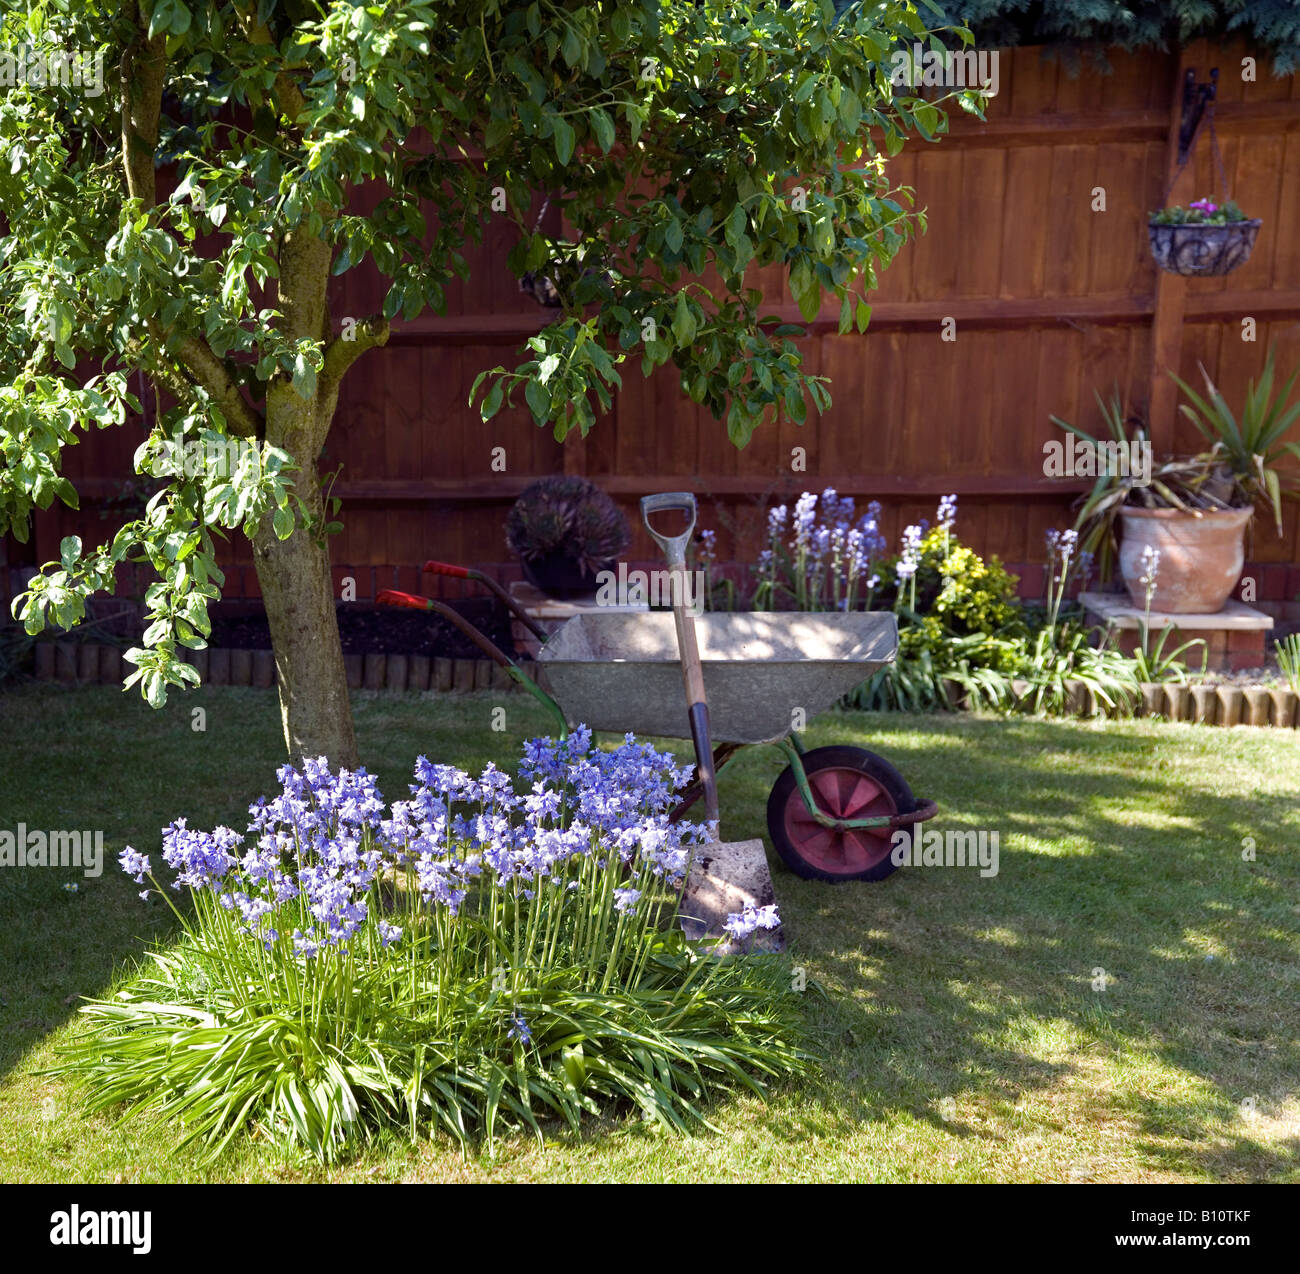 Part Of A Garden In Spring With A Plum Tree Spanish Bluebells And